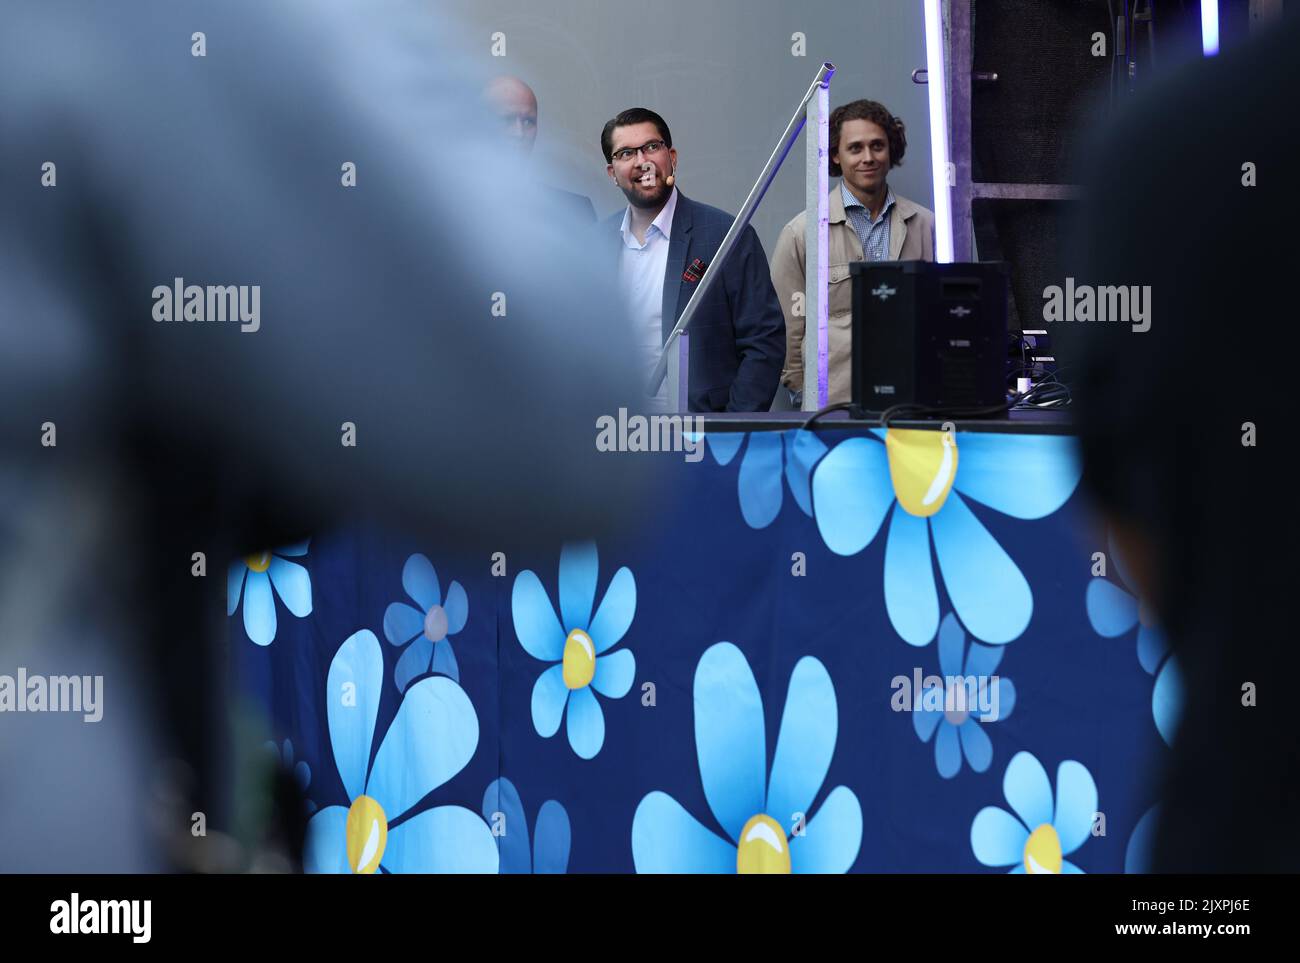 During Tuesday, the Sweden Democrats' Jimmie Åkesson (in there picture) and Jessica Stegrud visited Norrköping, Sweden. The visit was part of the party's campaign trip ahead of the Swedish parliamentary elections. The party writes in the press release that, among other things, entertainment and speeches will be offered. Stock Photo